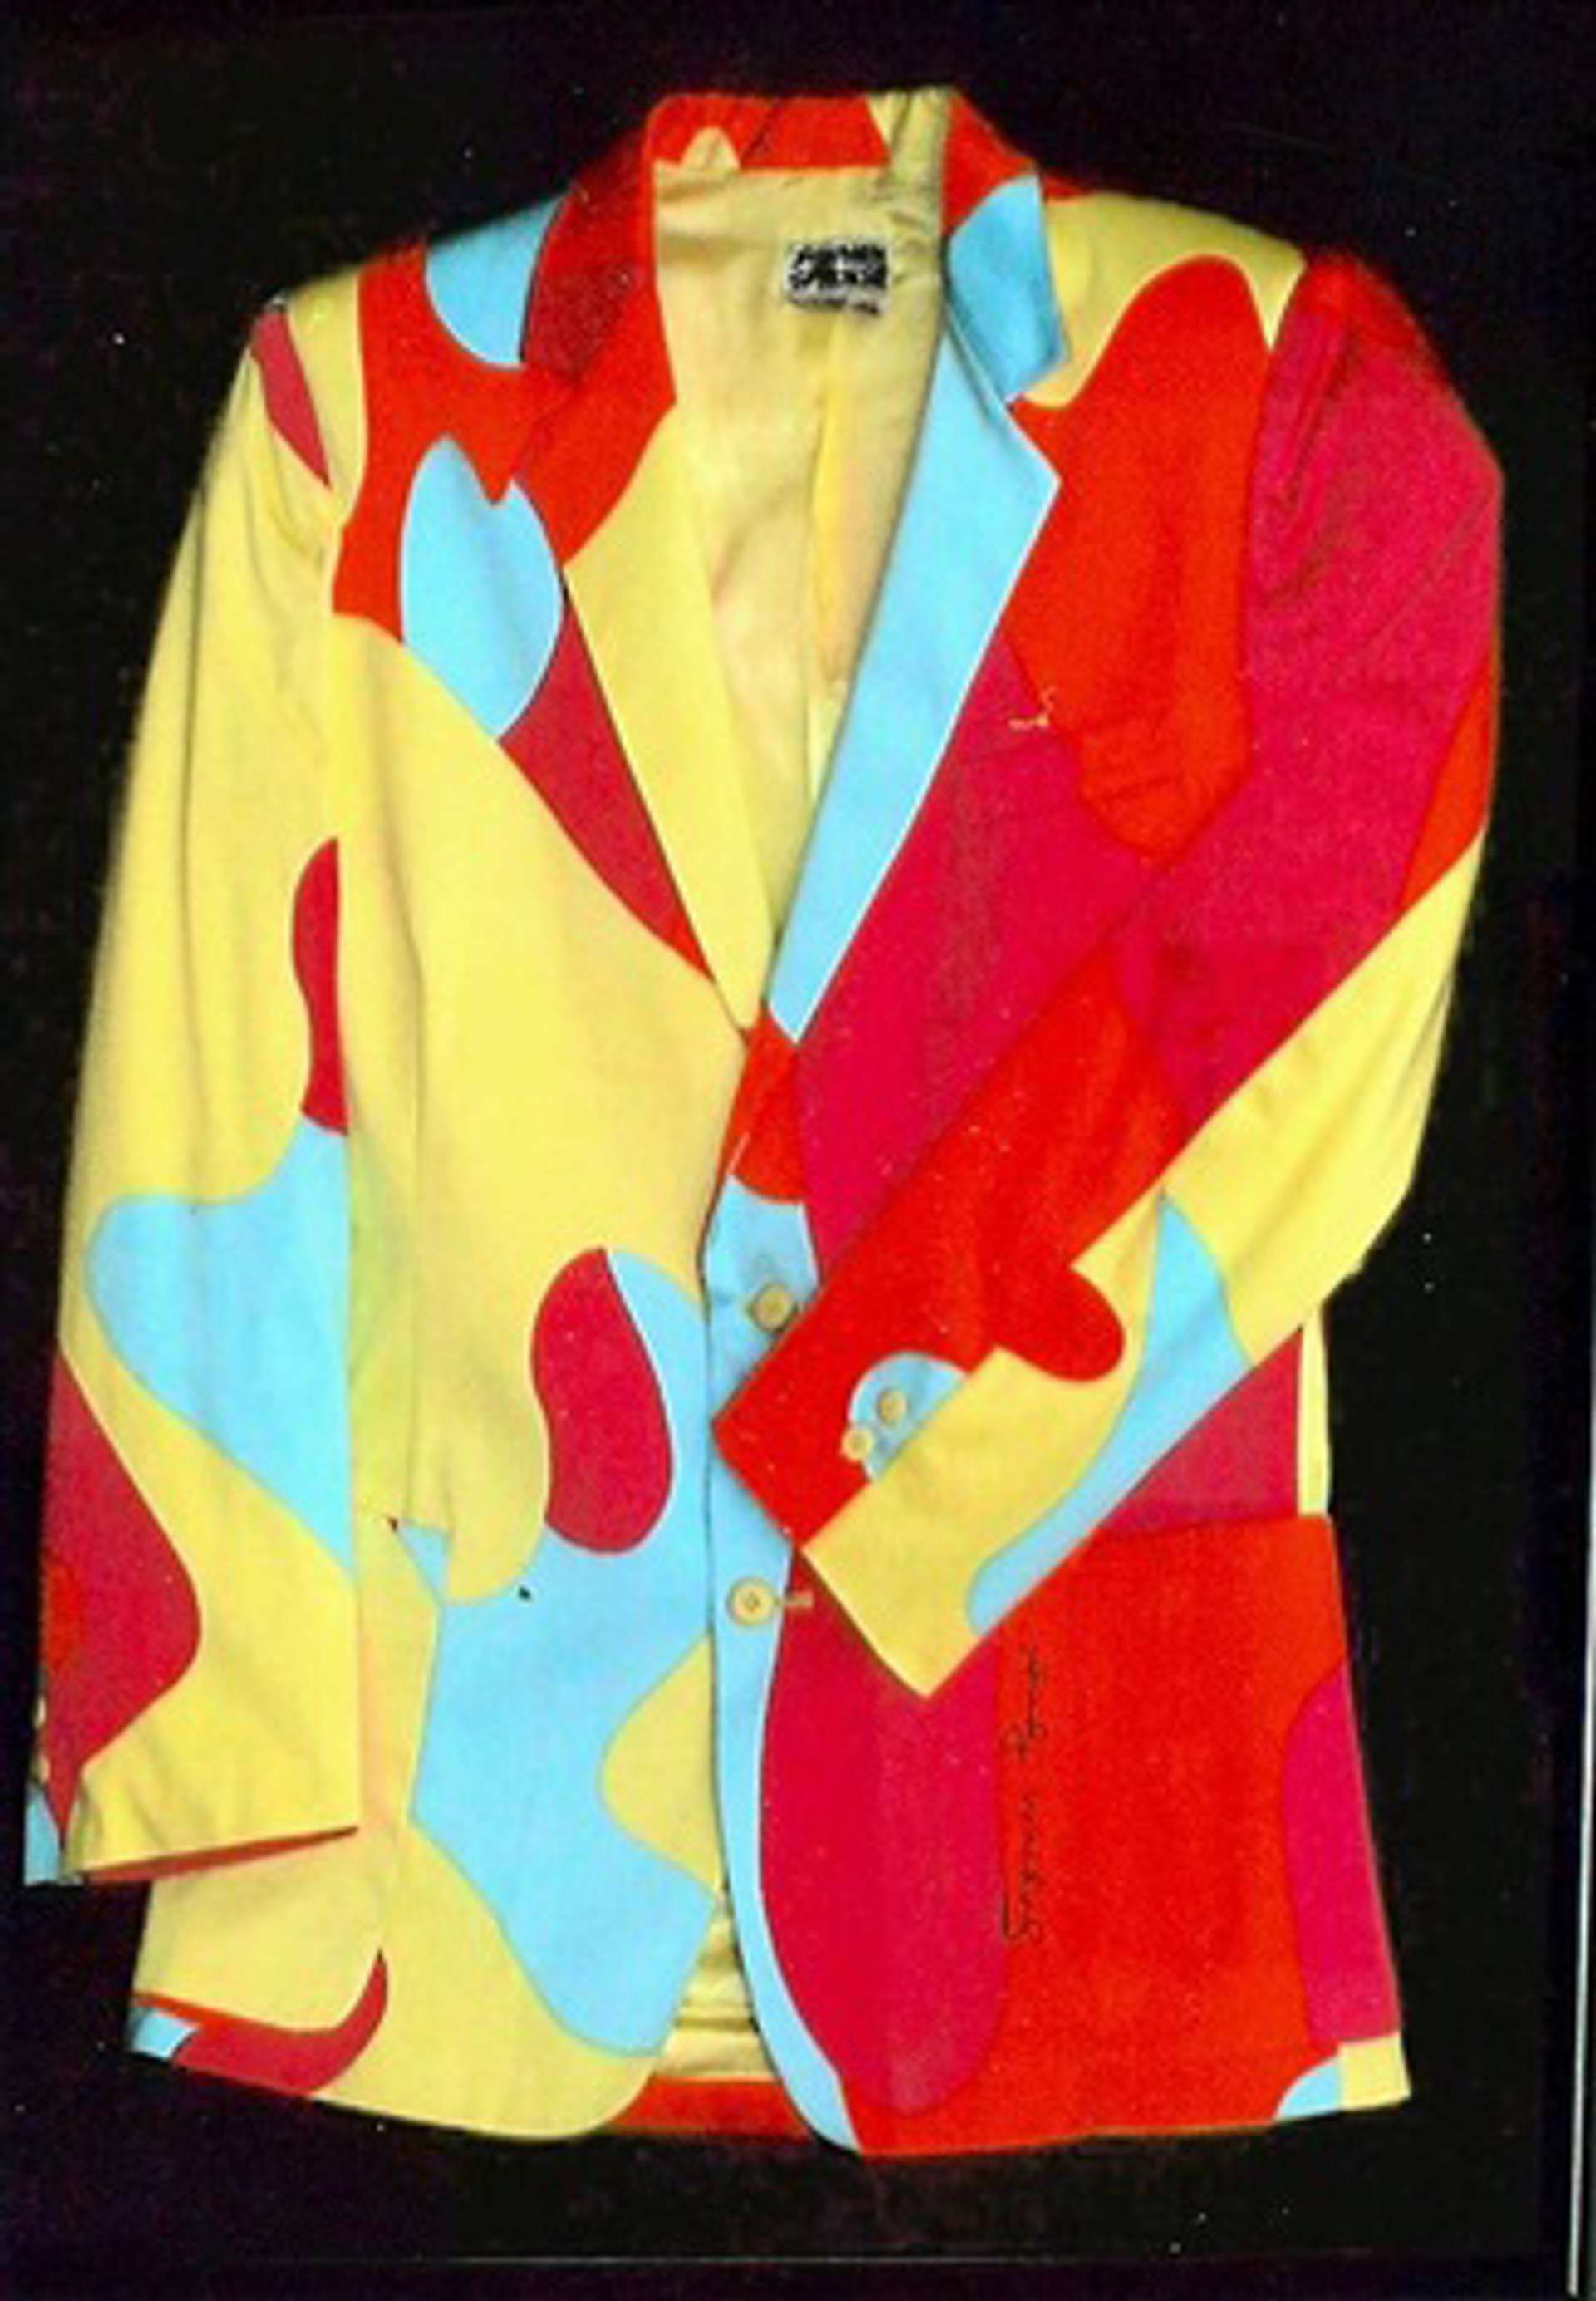 Andy Warhol Camouflage Jacket by Stephen Sprouse